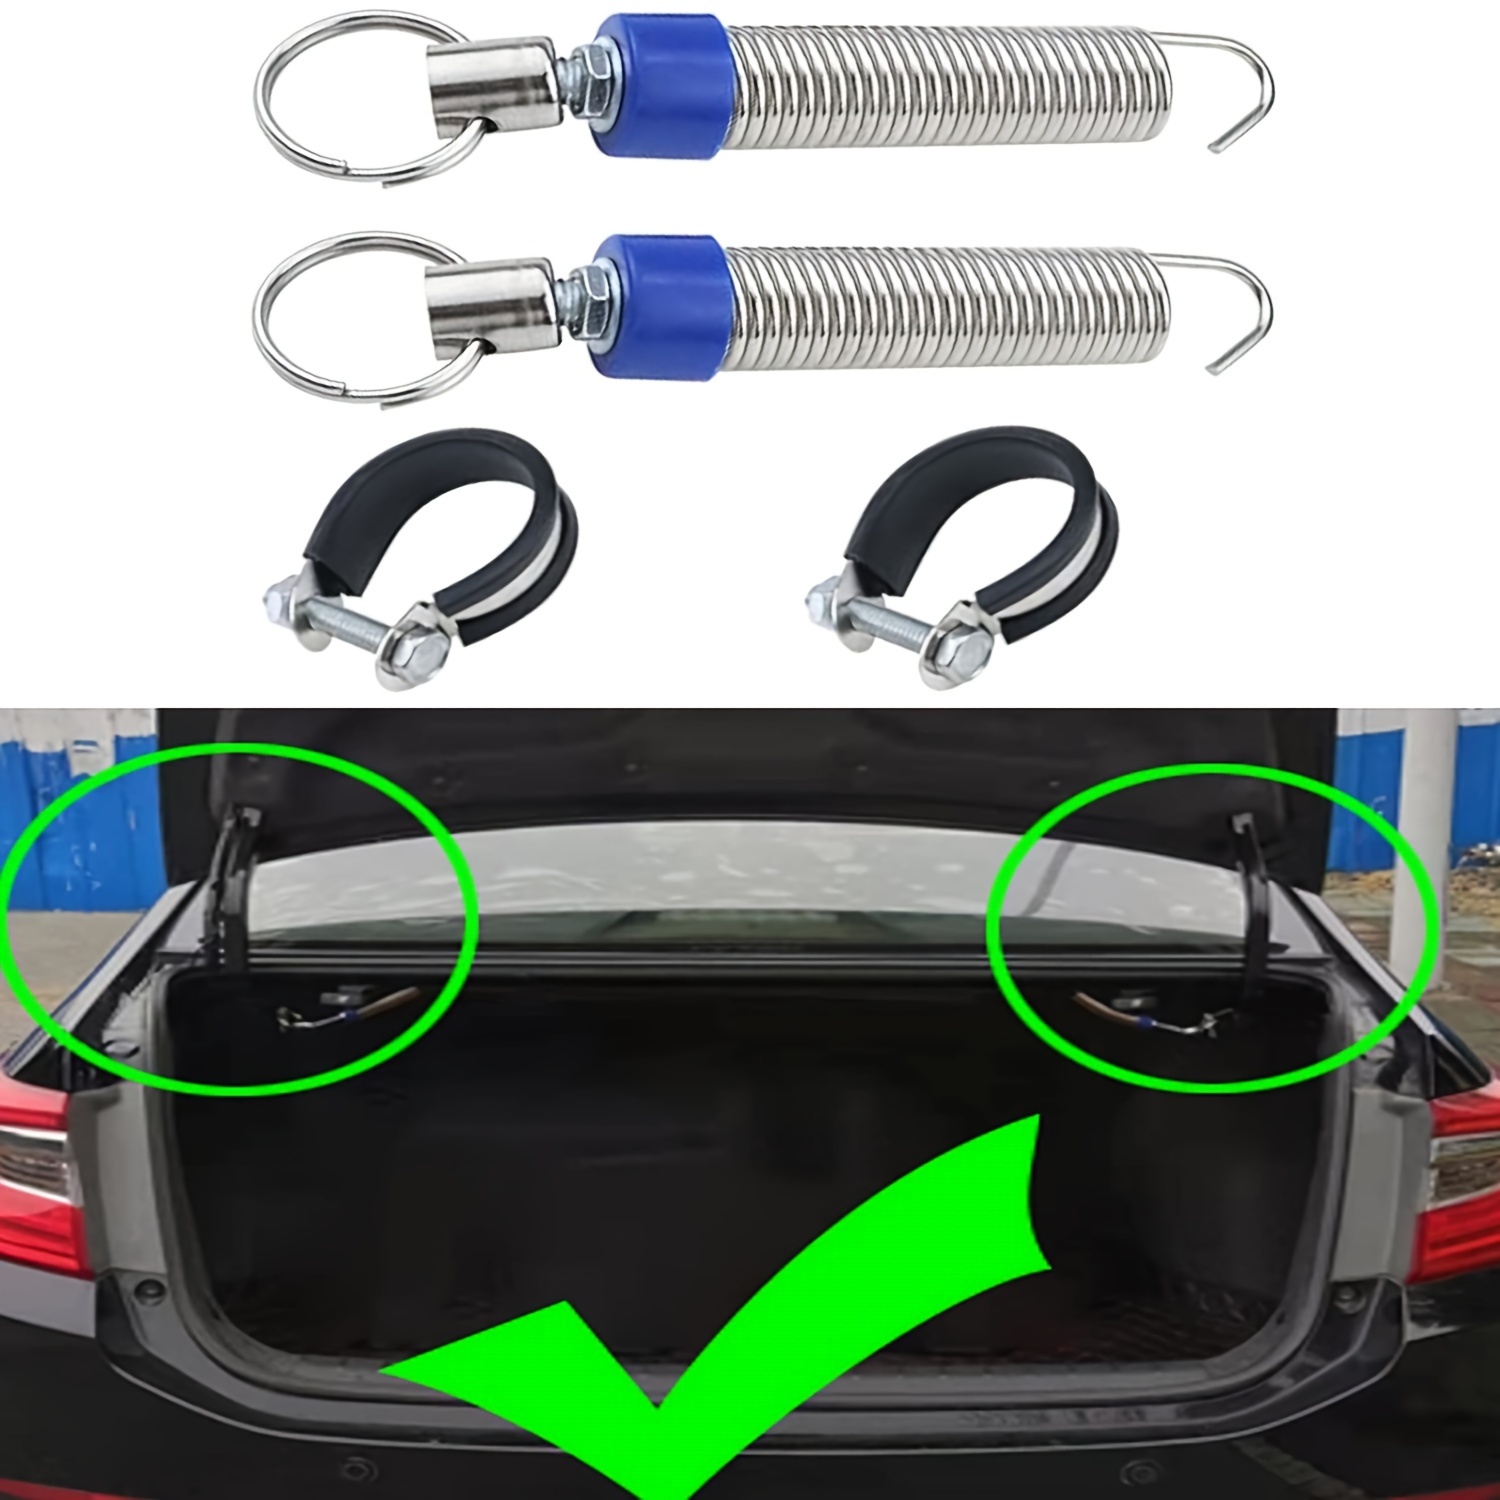  ESEWALAS 2Pcs Car Trunk Tail Boot Lid Lifting Device Spring,Adjustable  Metal Trunk Spring Lifting Device Trunk Spring Lifting Device,Universal  Lifter Accessory Open Tool for Remote-Controlled Auto Lid : Automotive